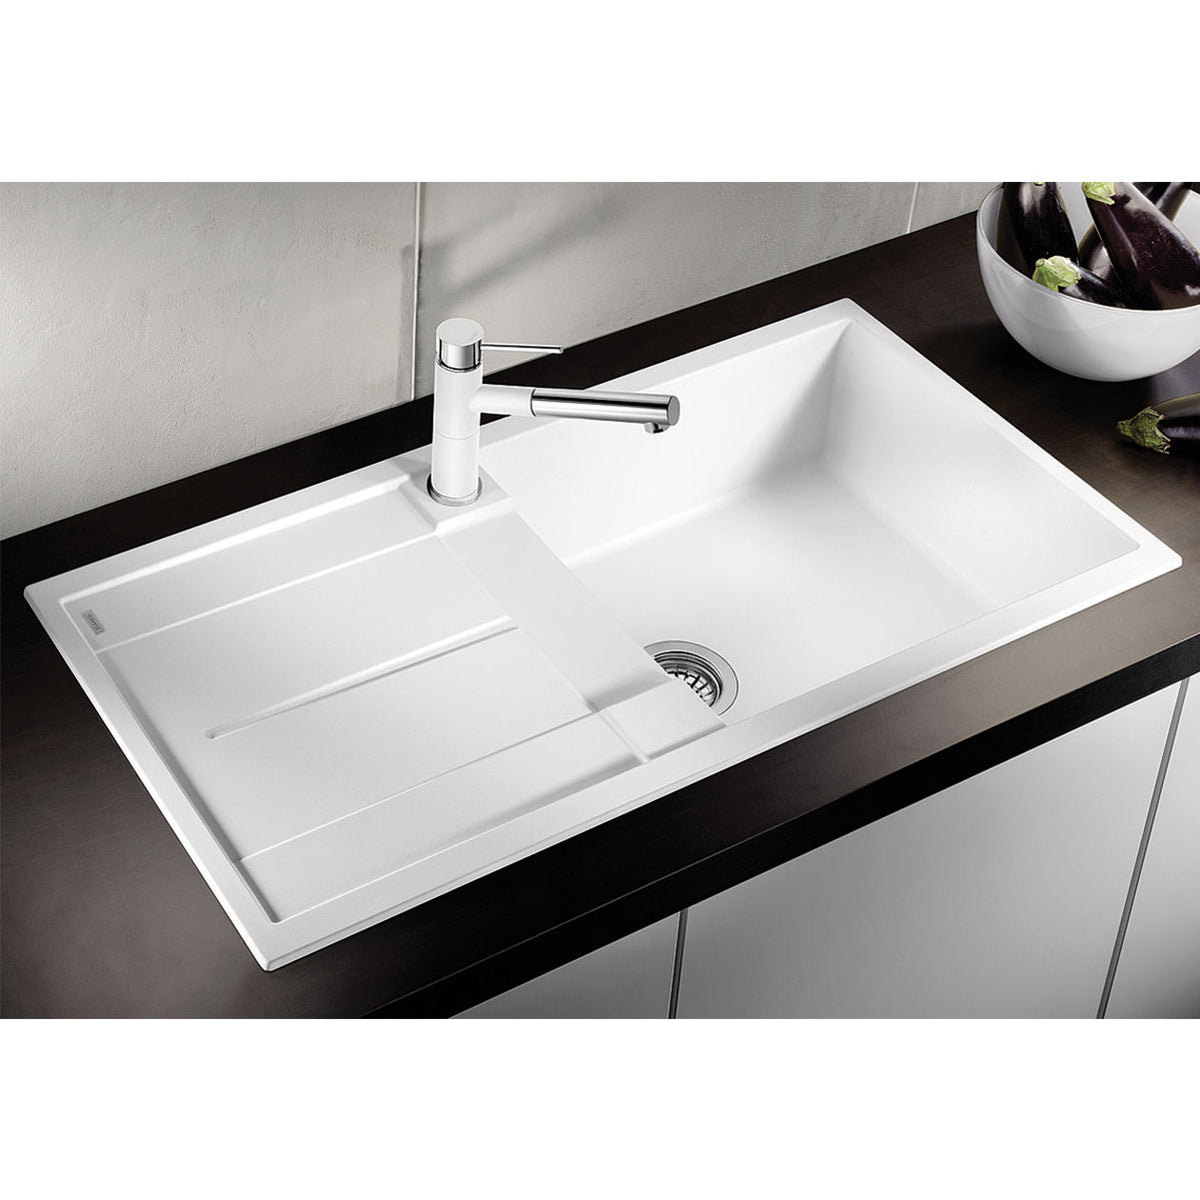 Evier granit anthracite BLANCO METRA XL 6 S 1 grand bac